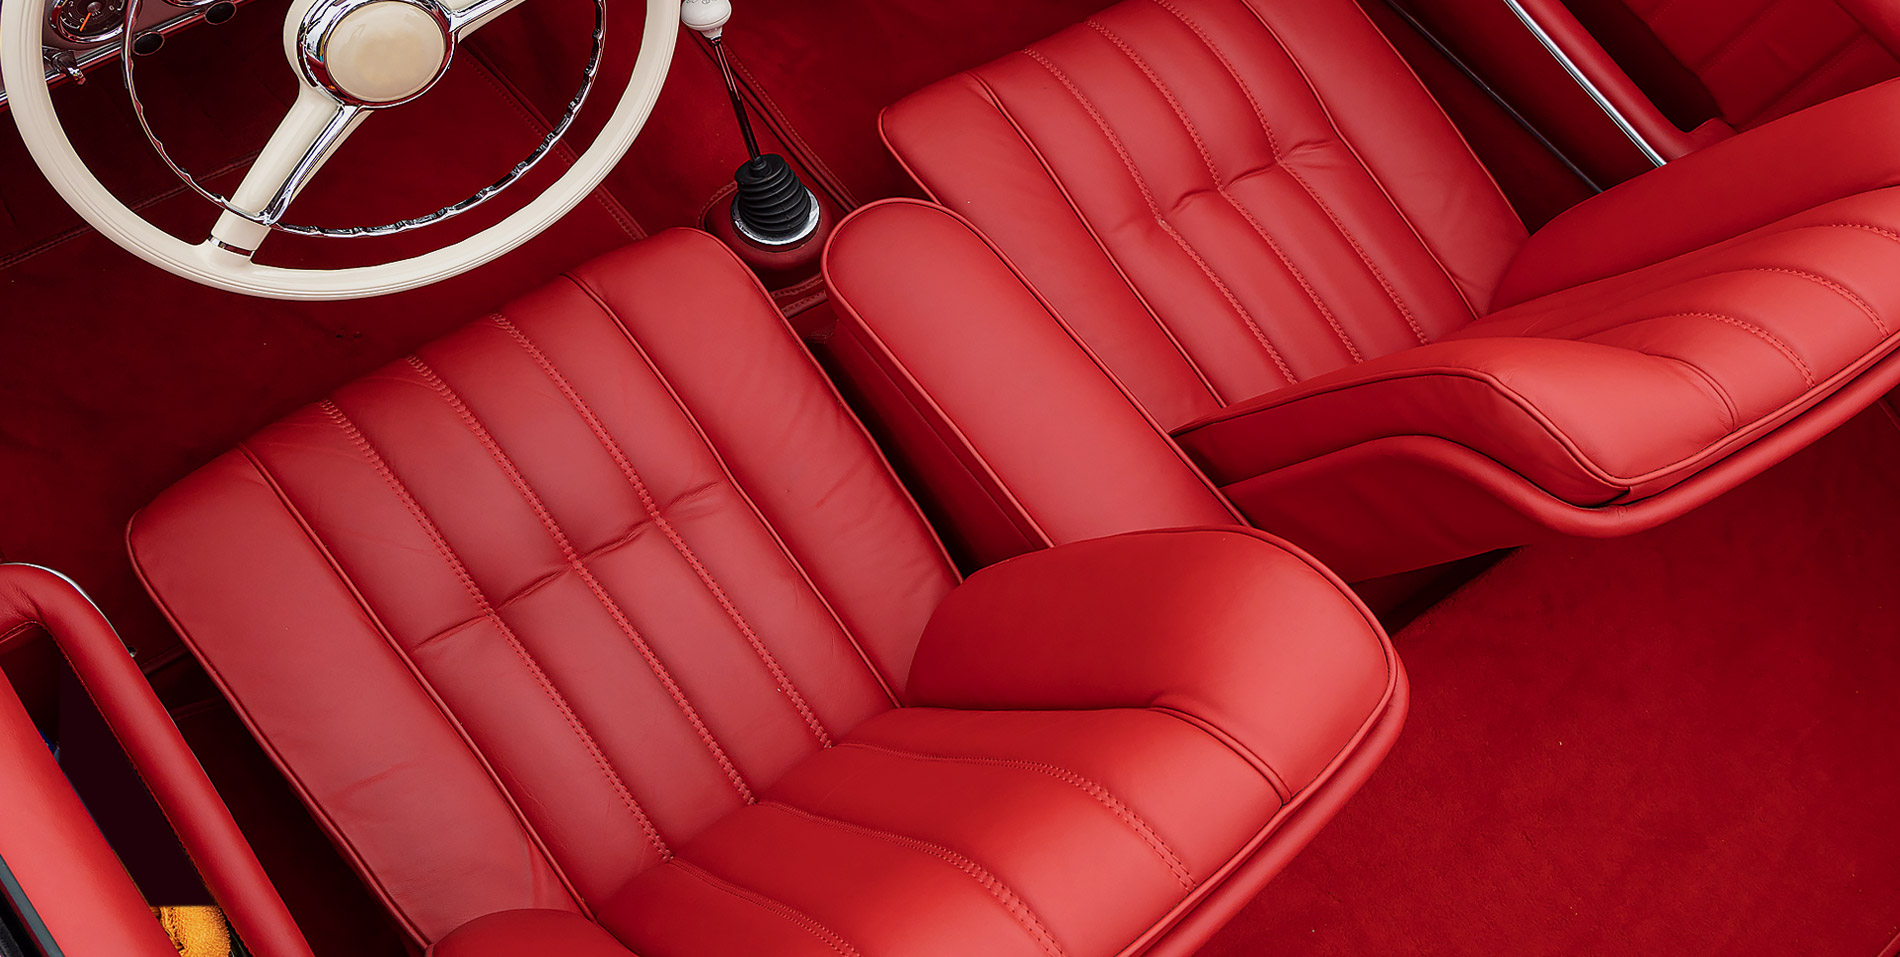 We want your auto interior to be truly beautiful